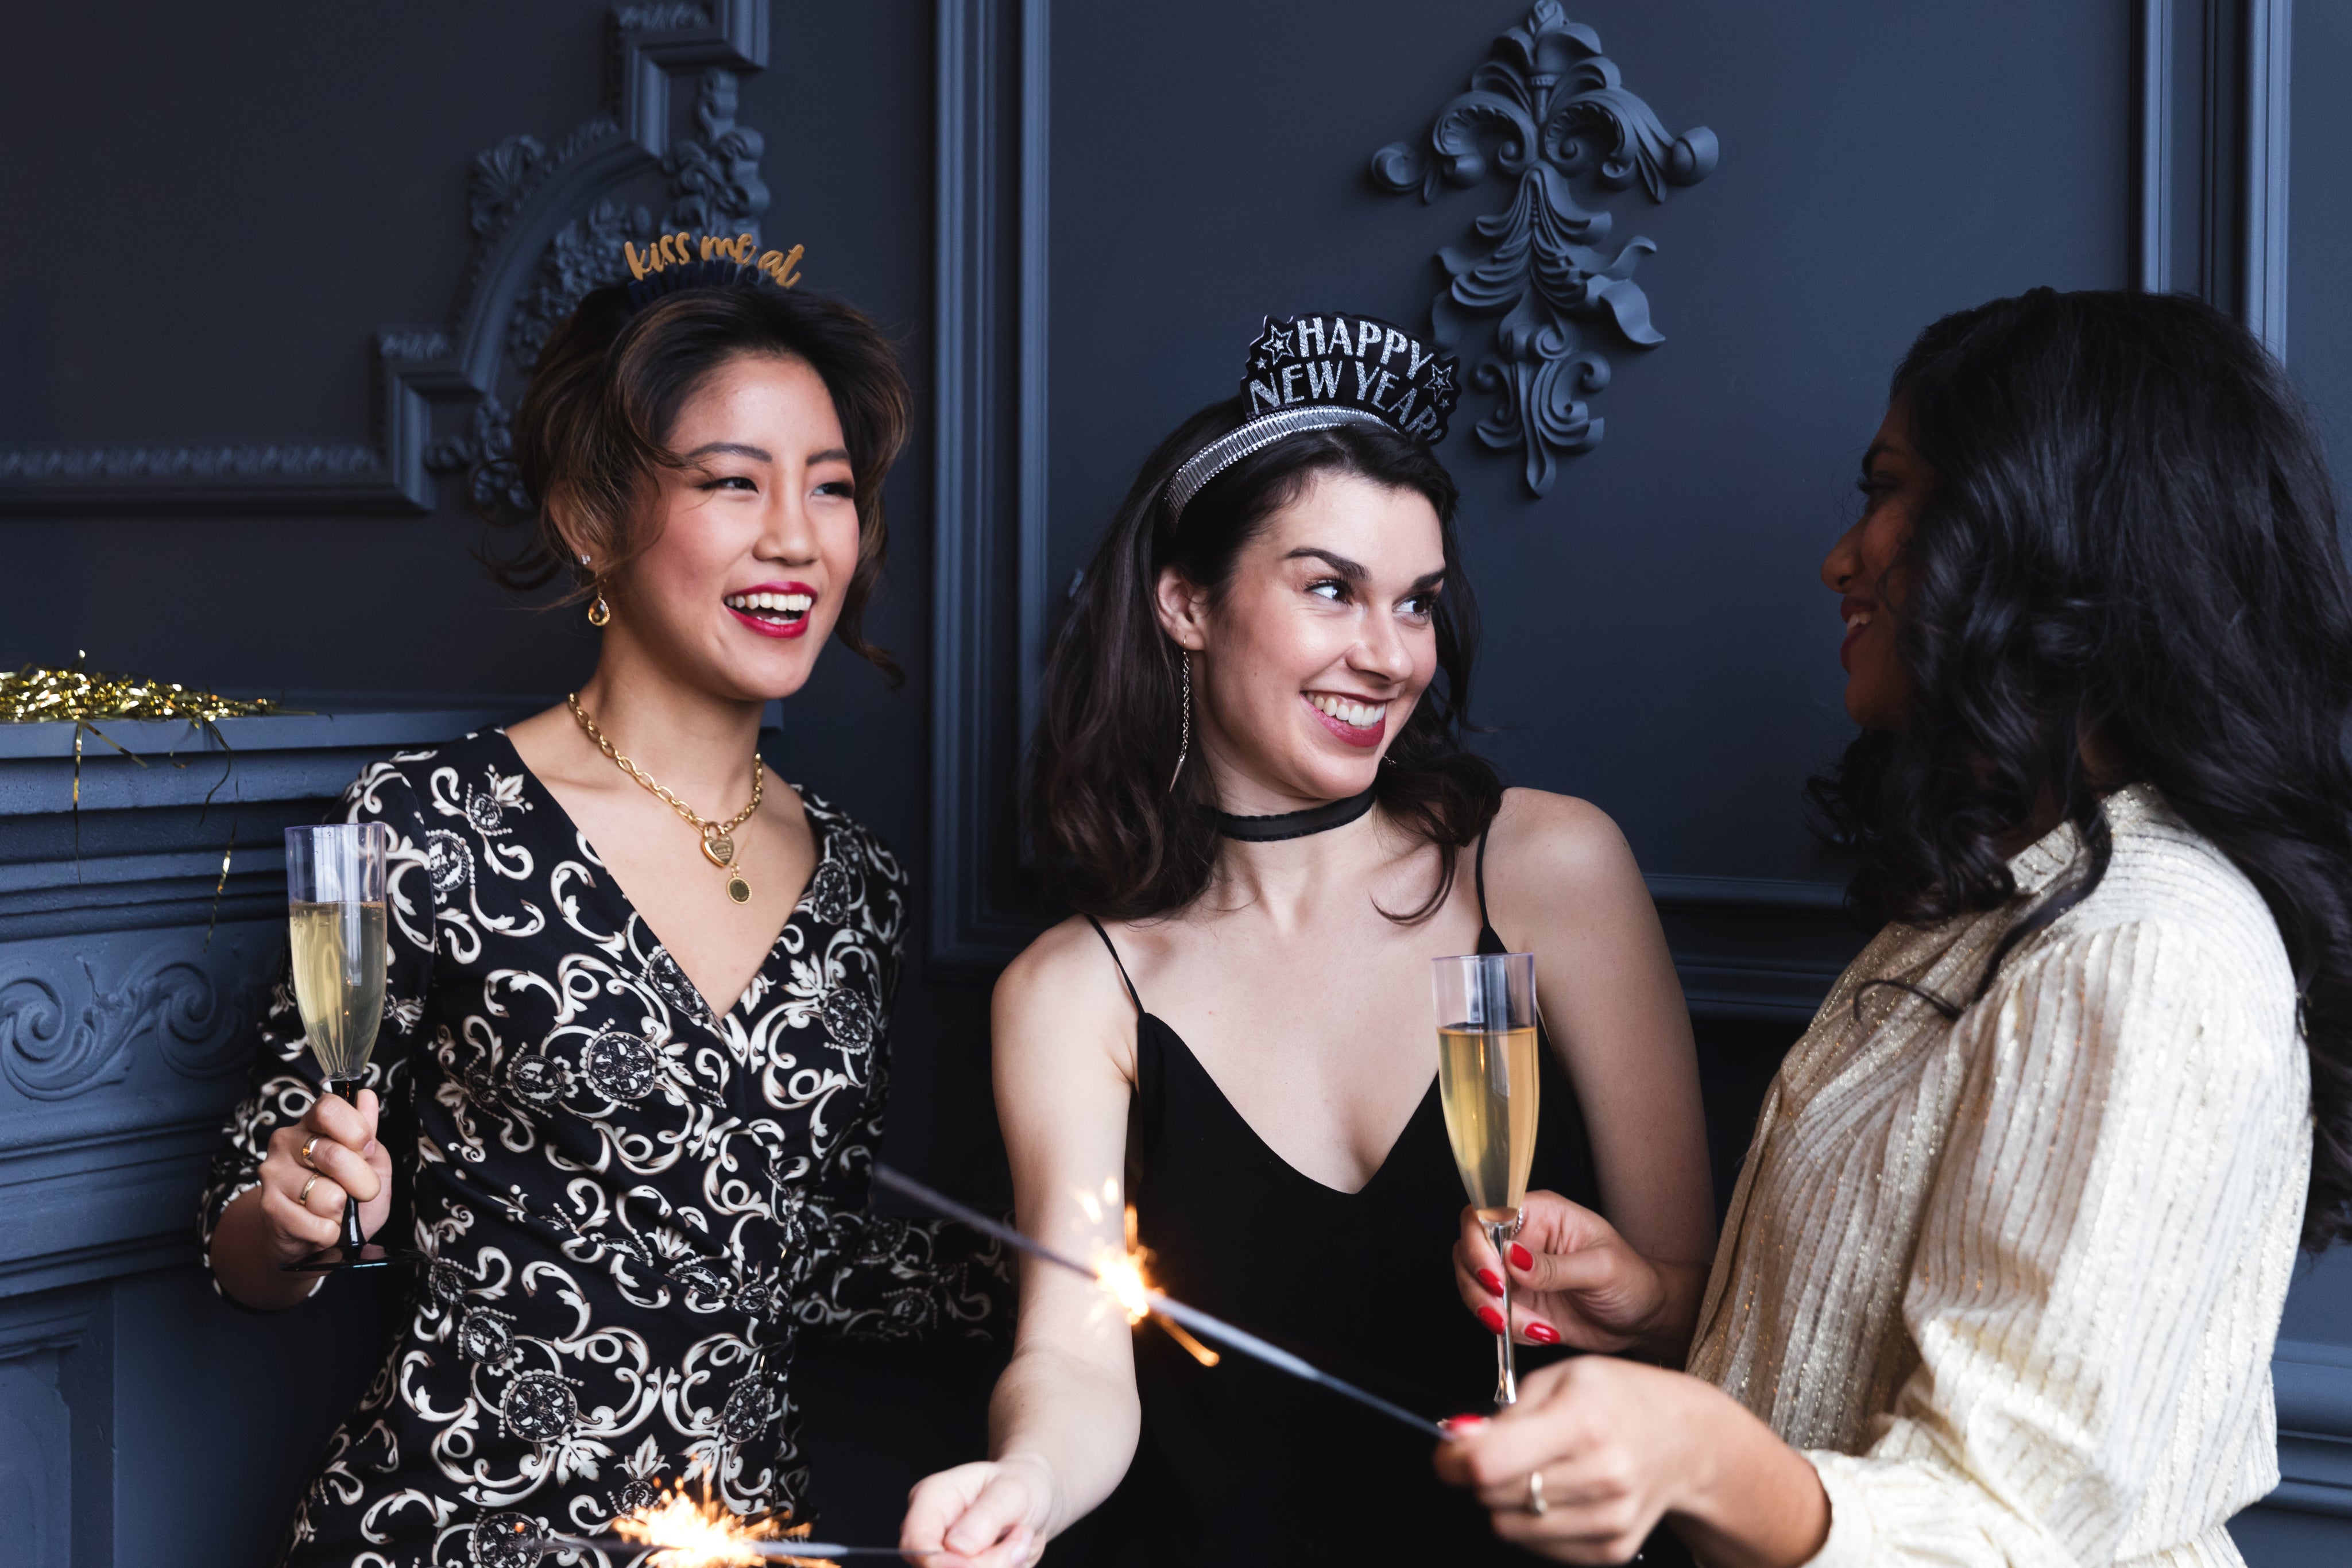 3 women celebrating at a new year's party 